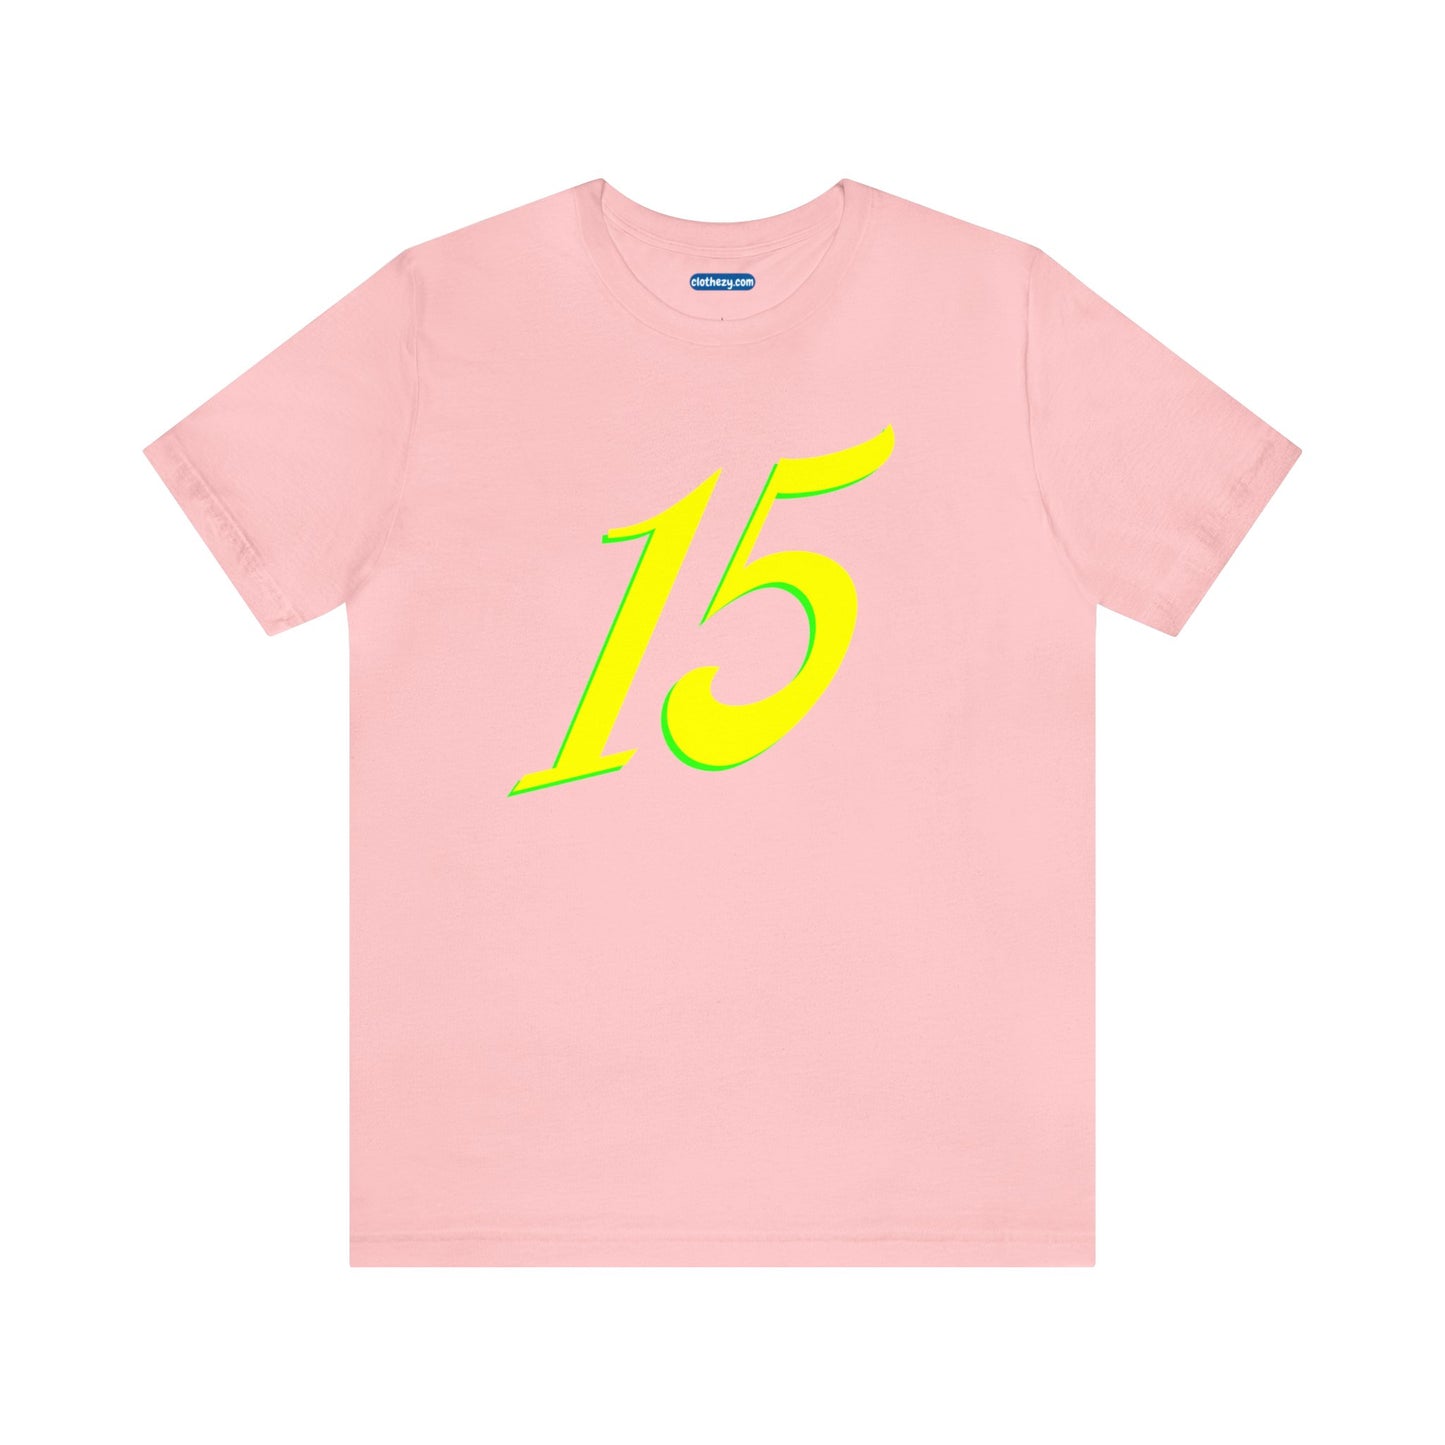 Number 15 Design - Soft Cotton Tee for birthdays and celebrations, Gift for friends and family, Multiple Options by clothezy.com in Red Size Small - Buy Now